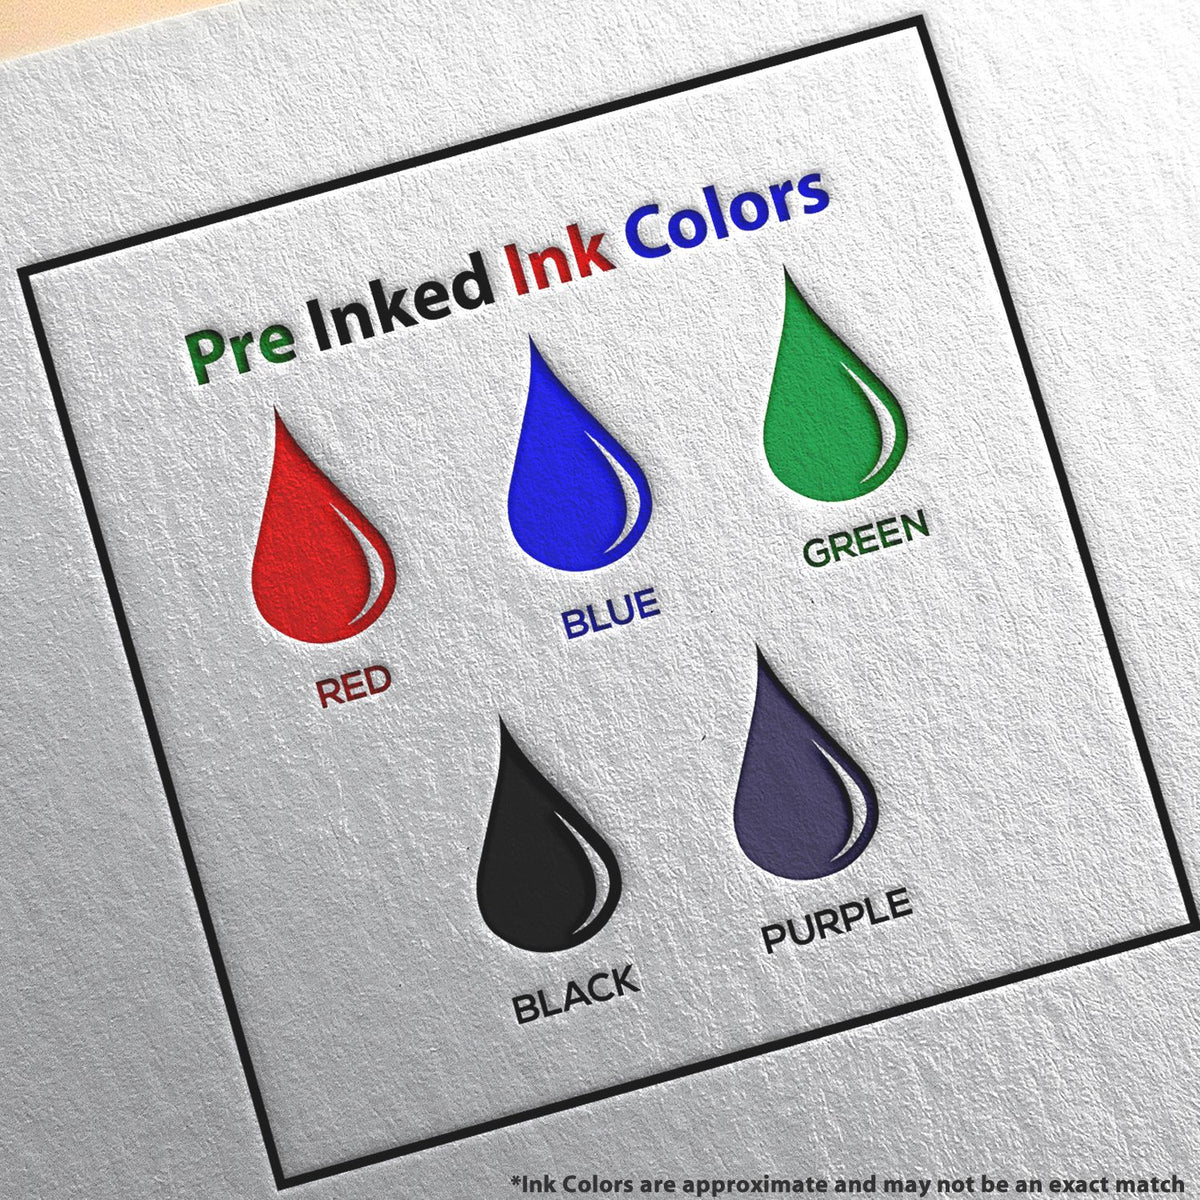 A picture showing the different ink colors or hues available for the Slim Pre-Inked Ohio Landscape Architect Seal Stamp product.